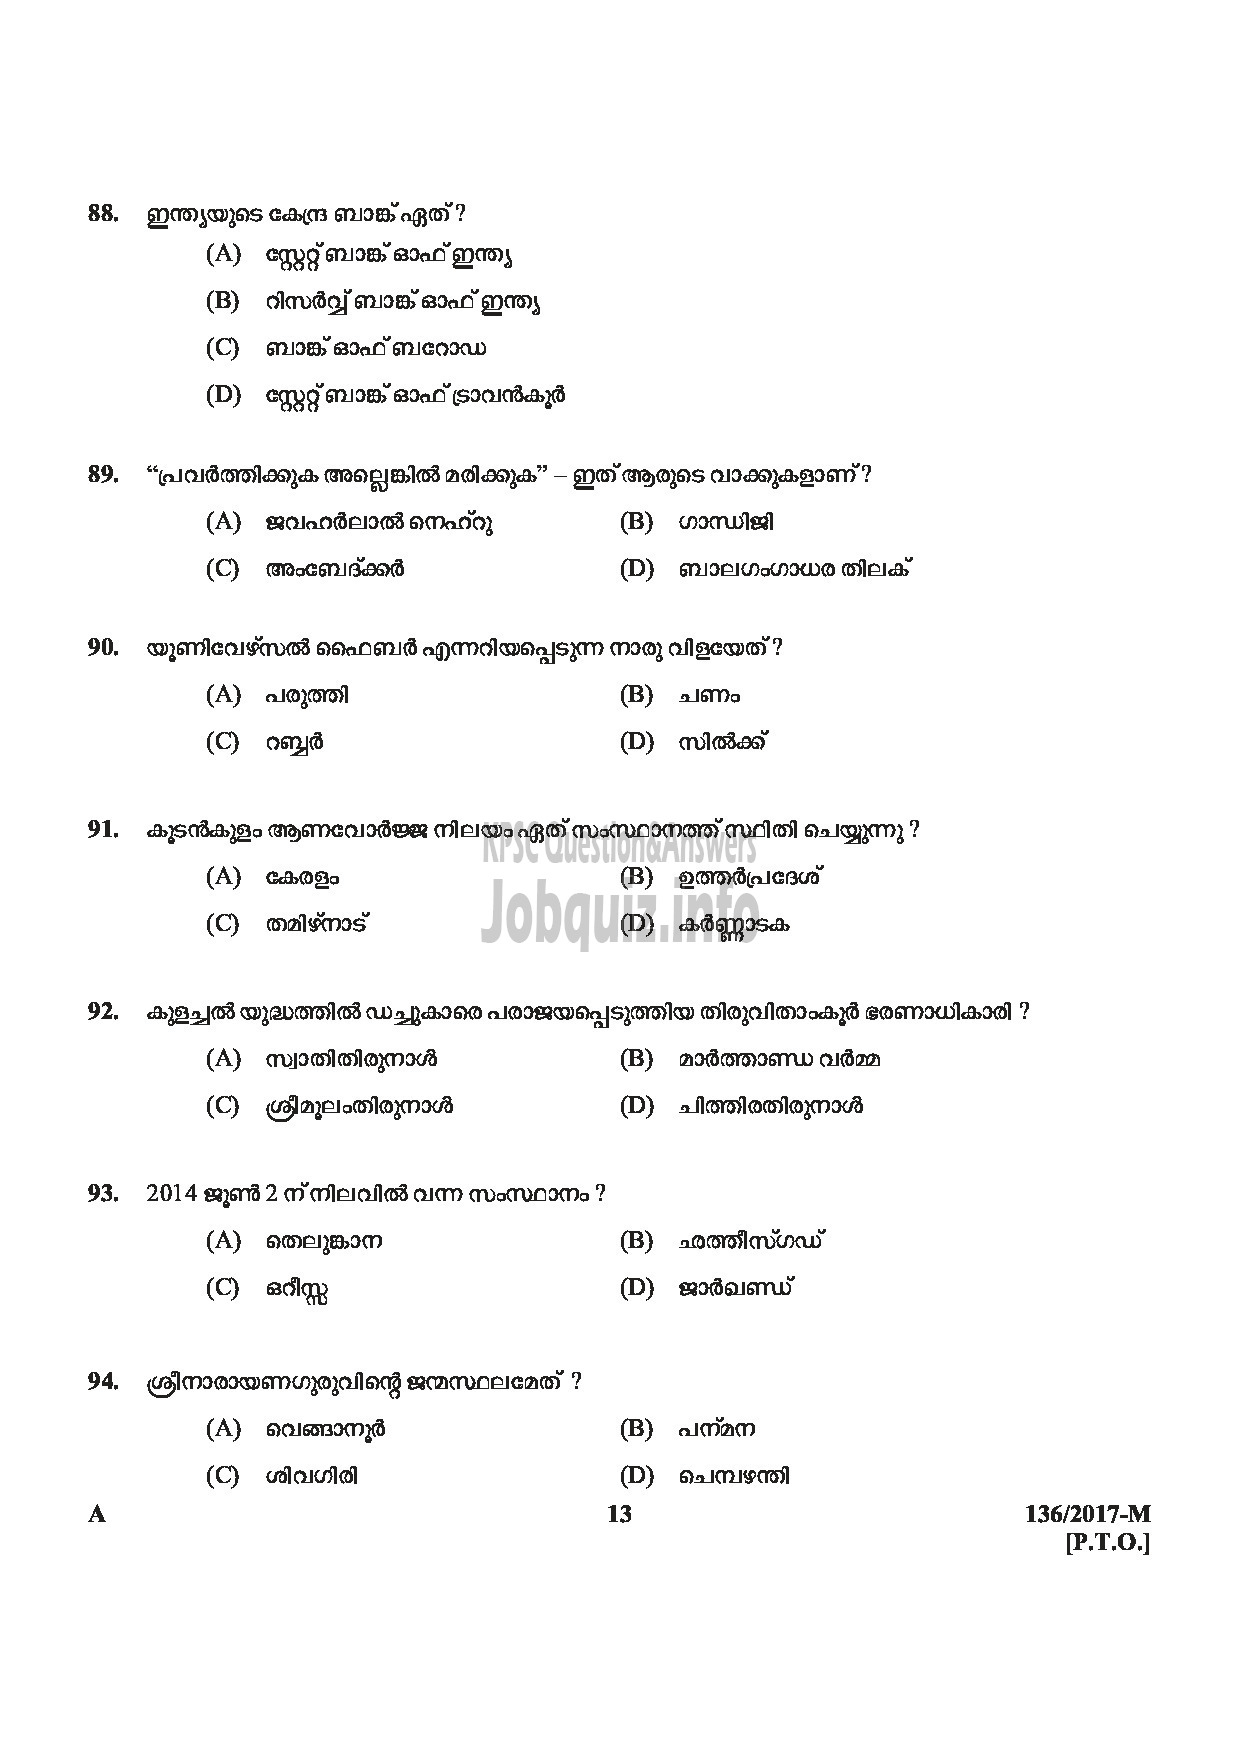 Kerala PSC Question Paper - METER READER/SPOT BILLER SPECIAL RECRUITMENT FROM AMONG ST ONLY MEDIUM OF QUESTION MALAYALAM-13